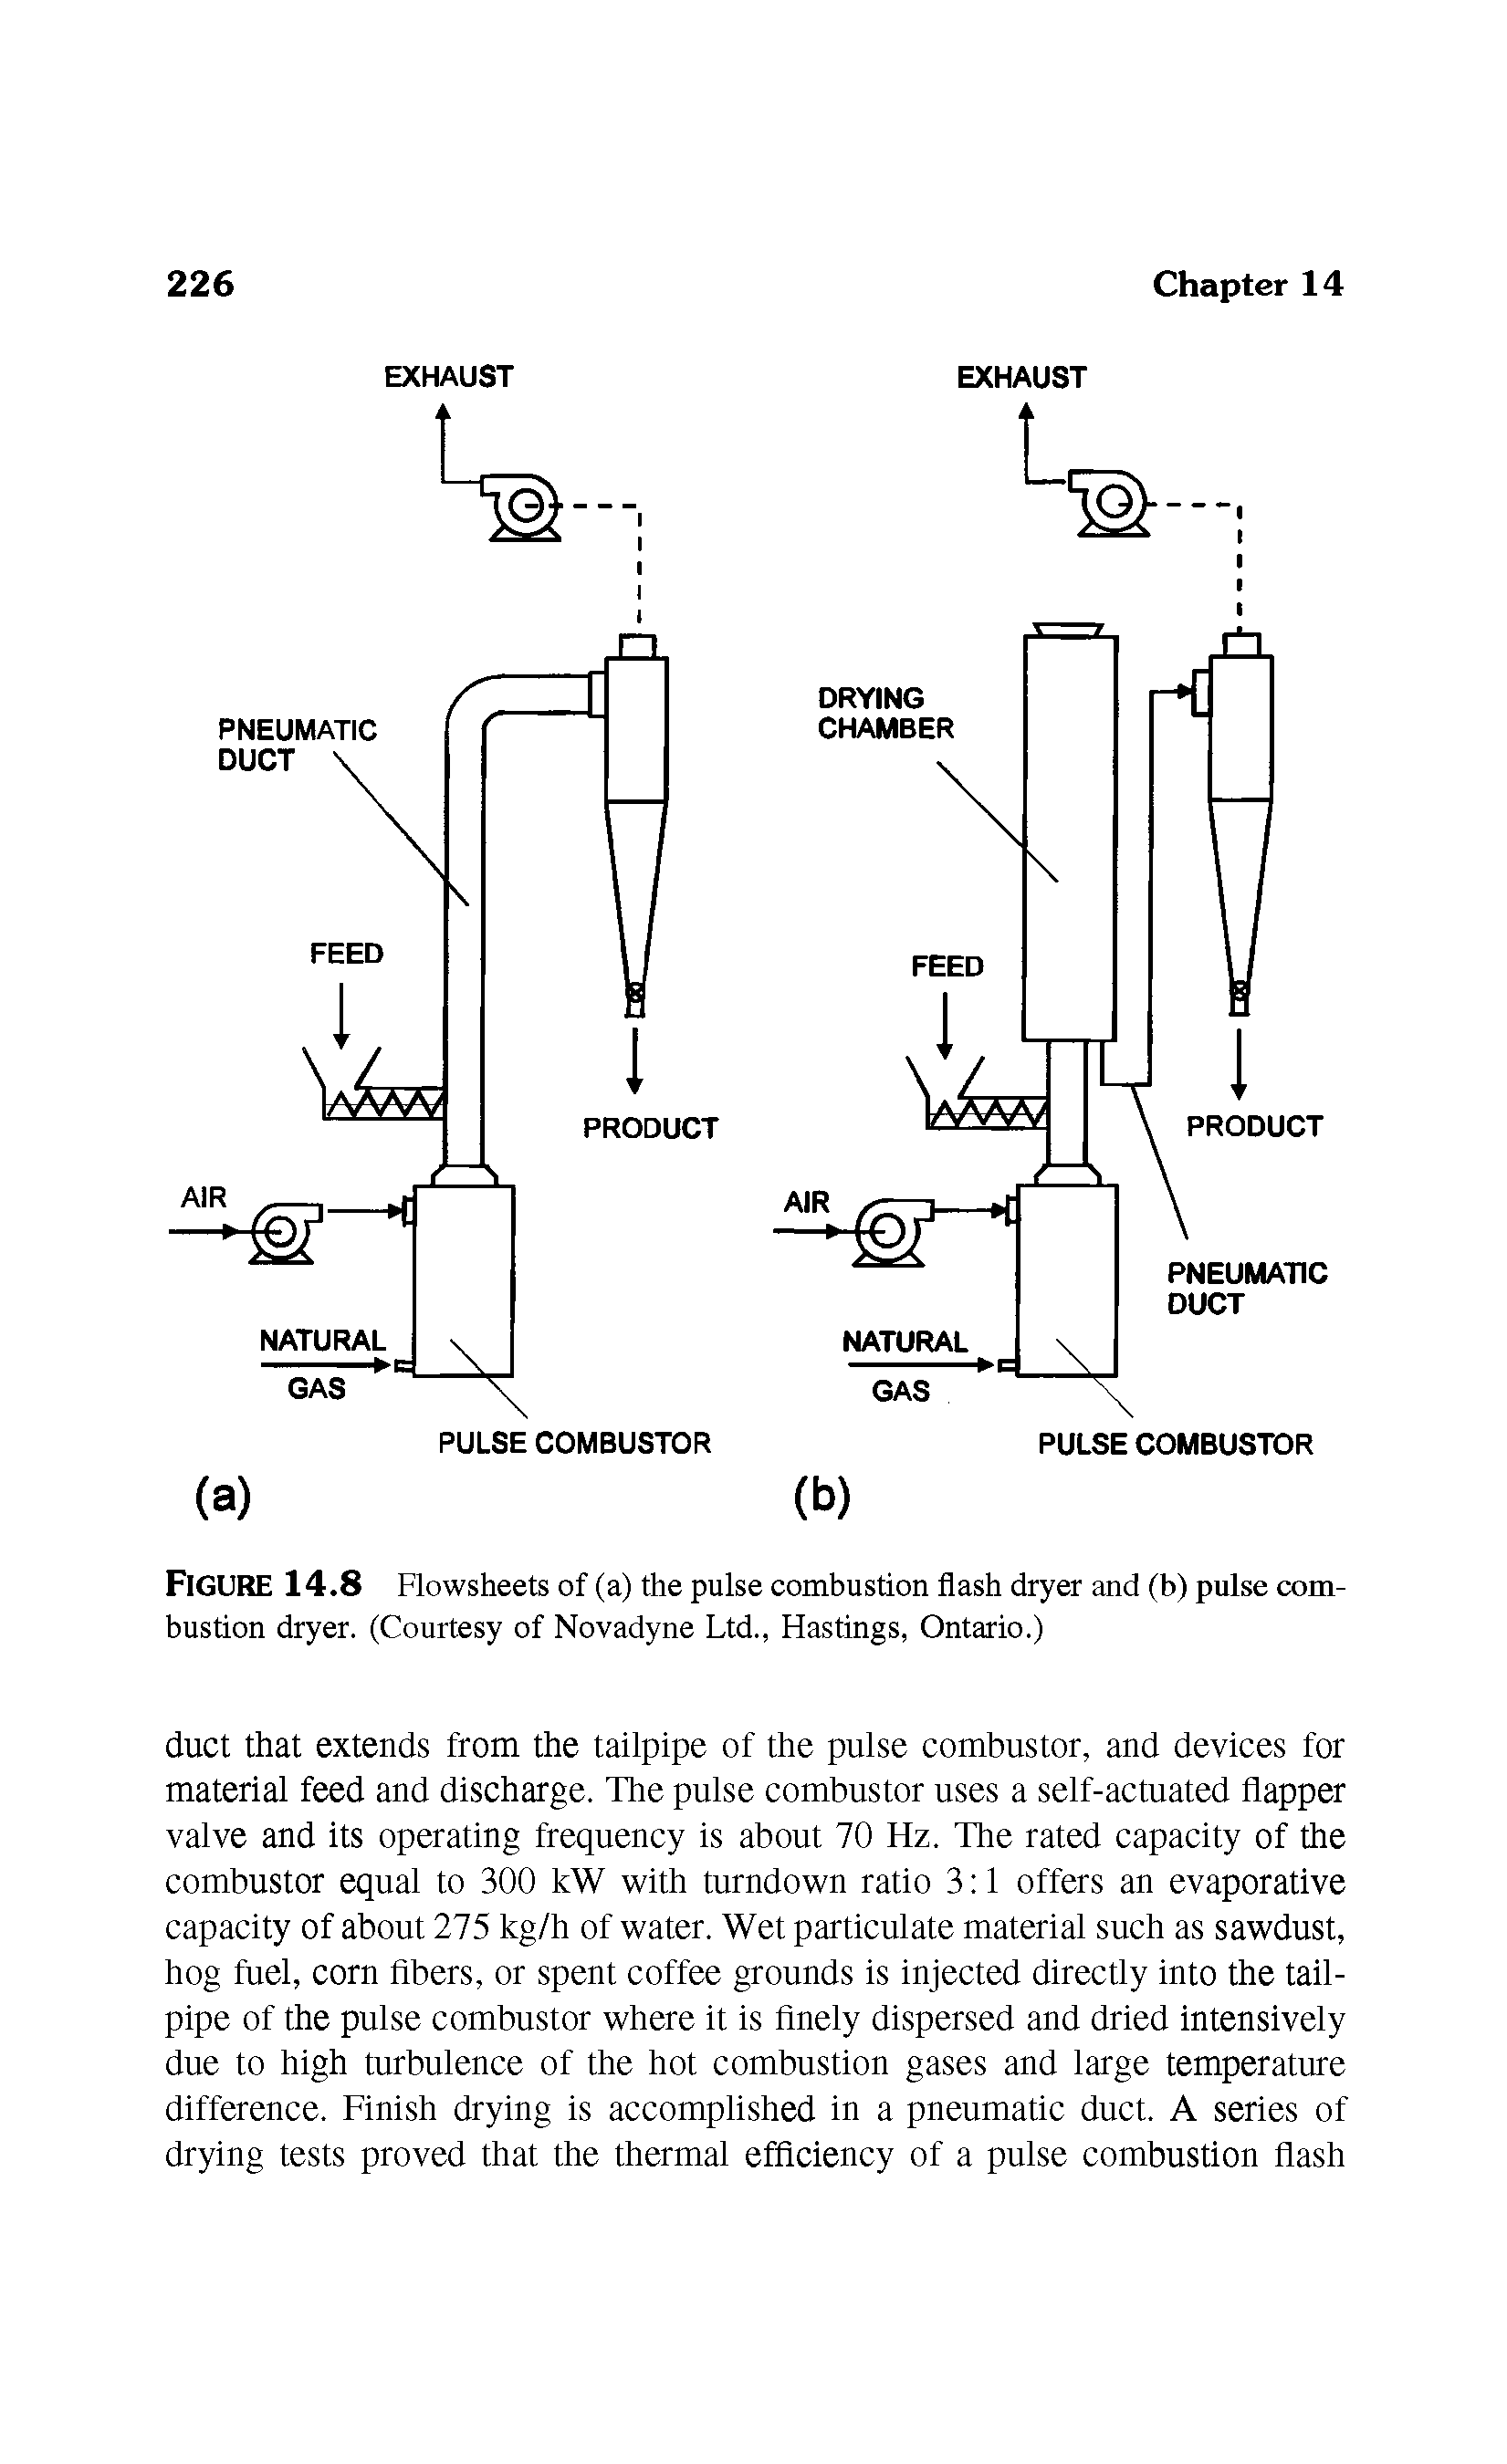 Figure 14.8 Flowsheets of (a) the pulse combustion flash dryer and (b) pulse combustion dryer. (Courtesy of Novadyne Ltd., Hastings, Ontario.)...